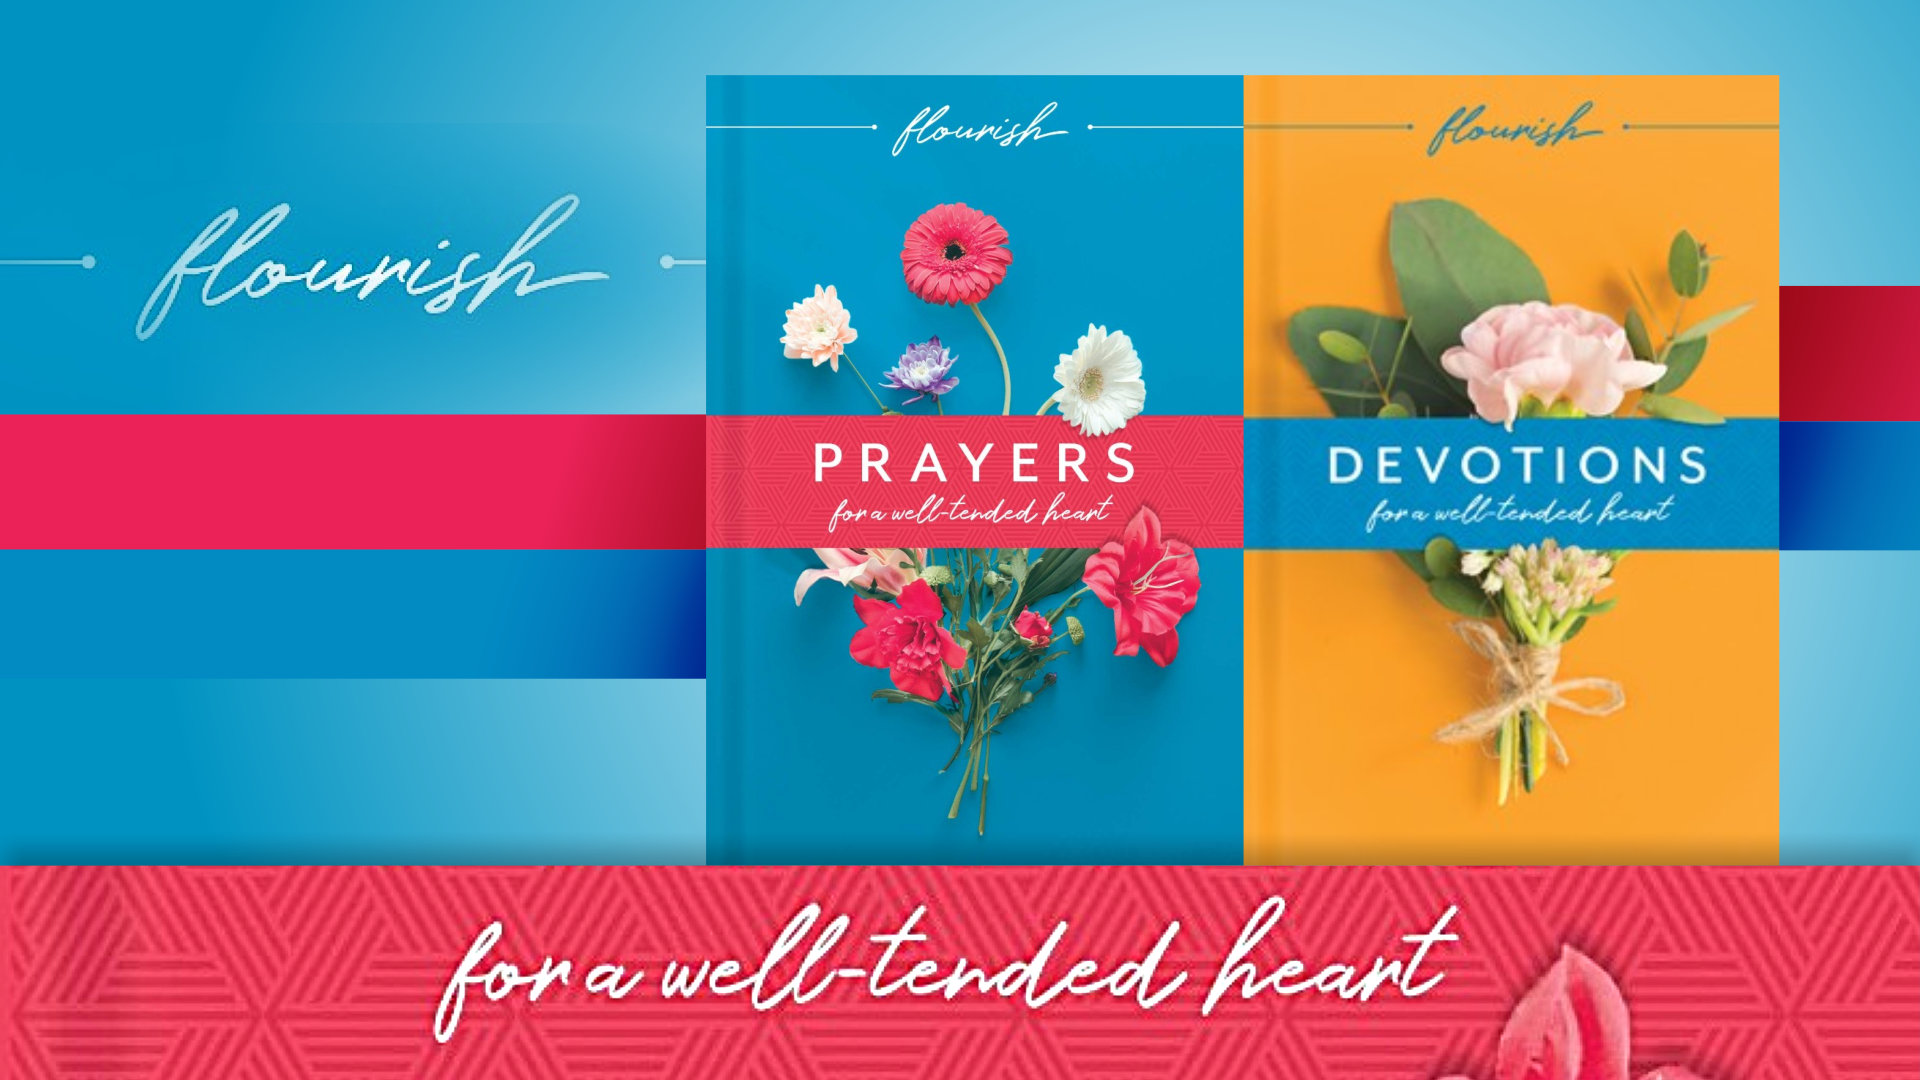 Flourish: Prayers and Devotions for a Well-Tended Heart